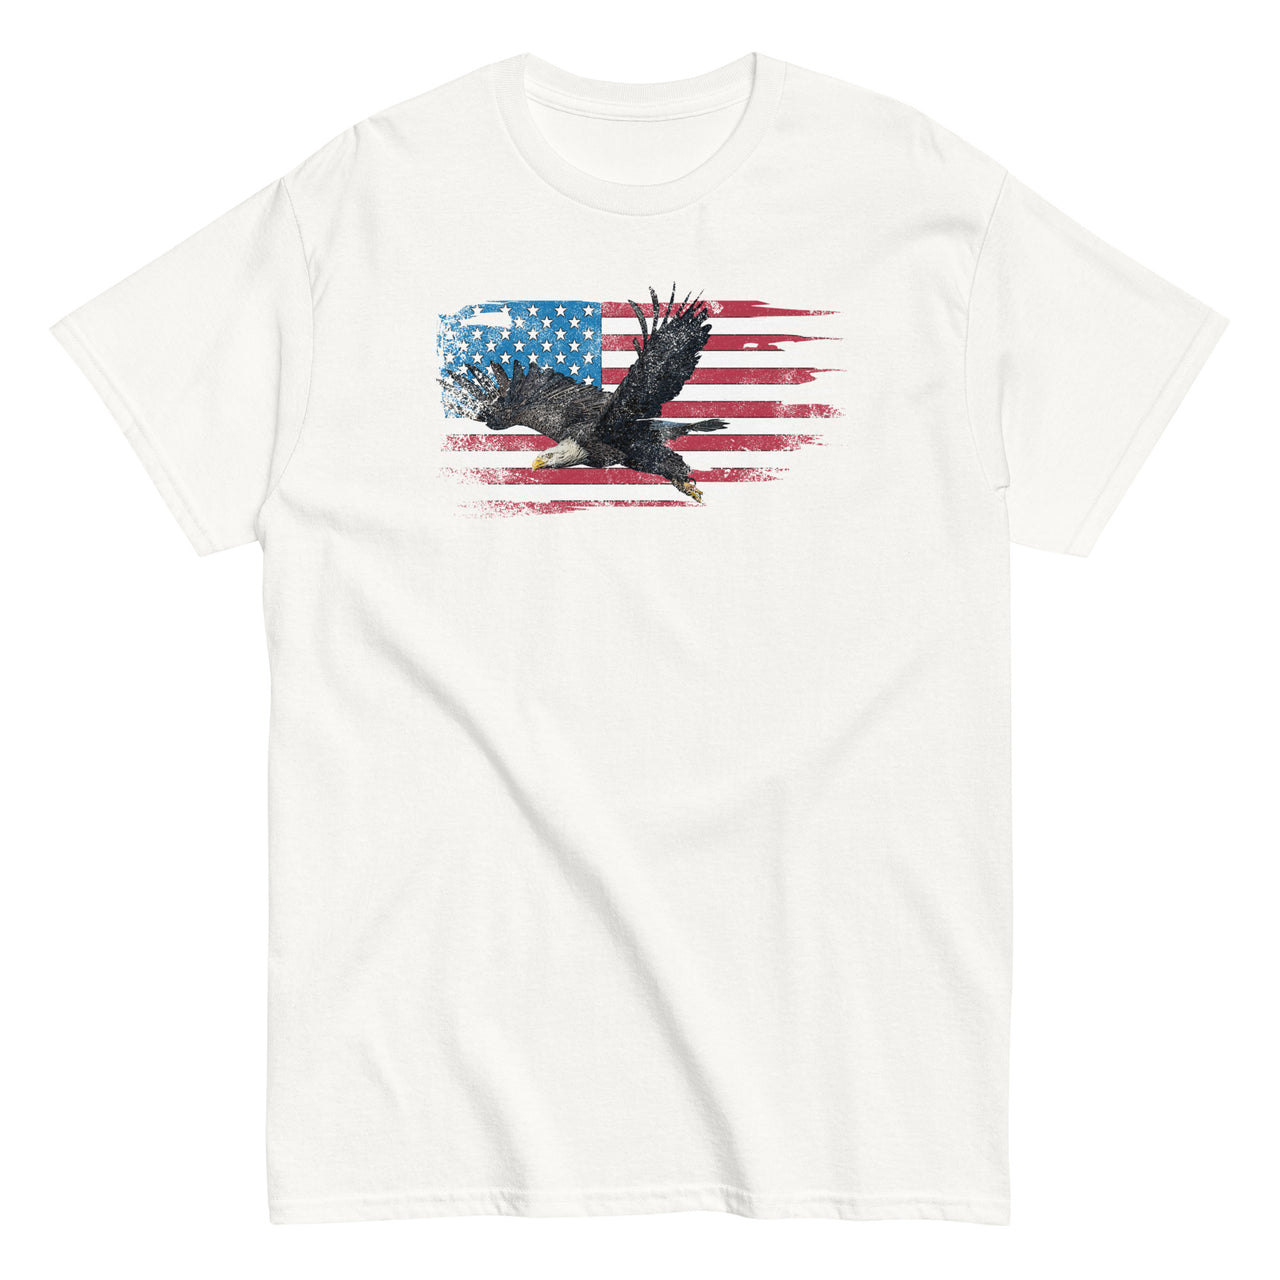 Patriotic American Flag Bald Eagle T-Shirt in white